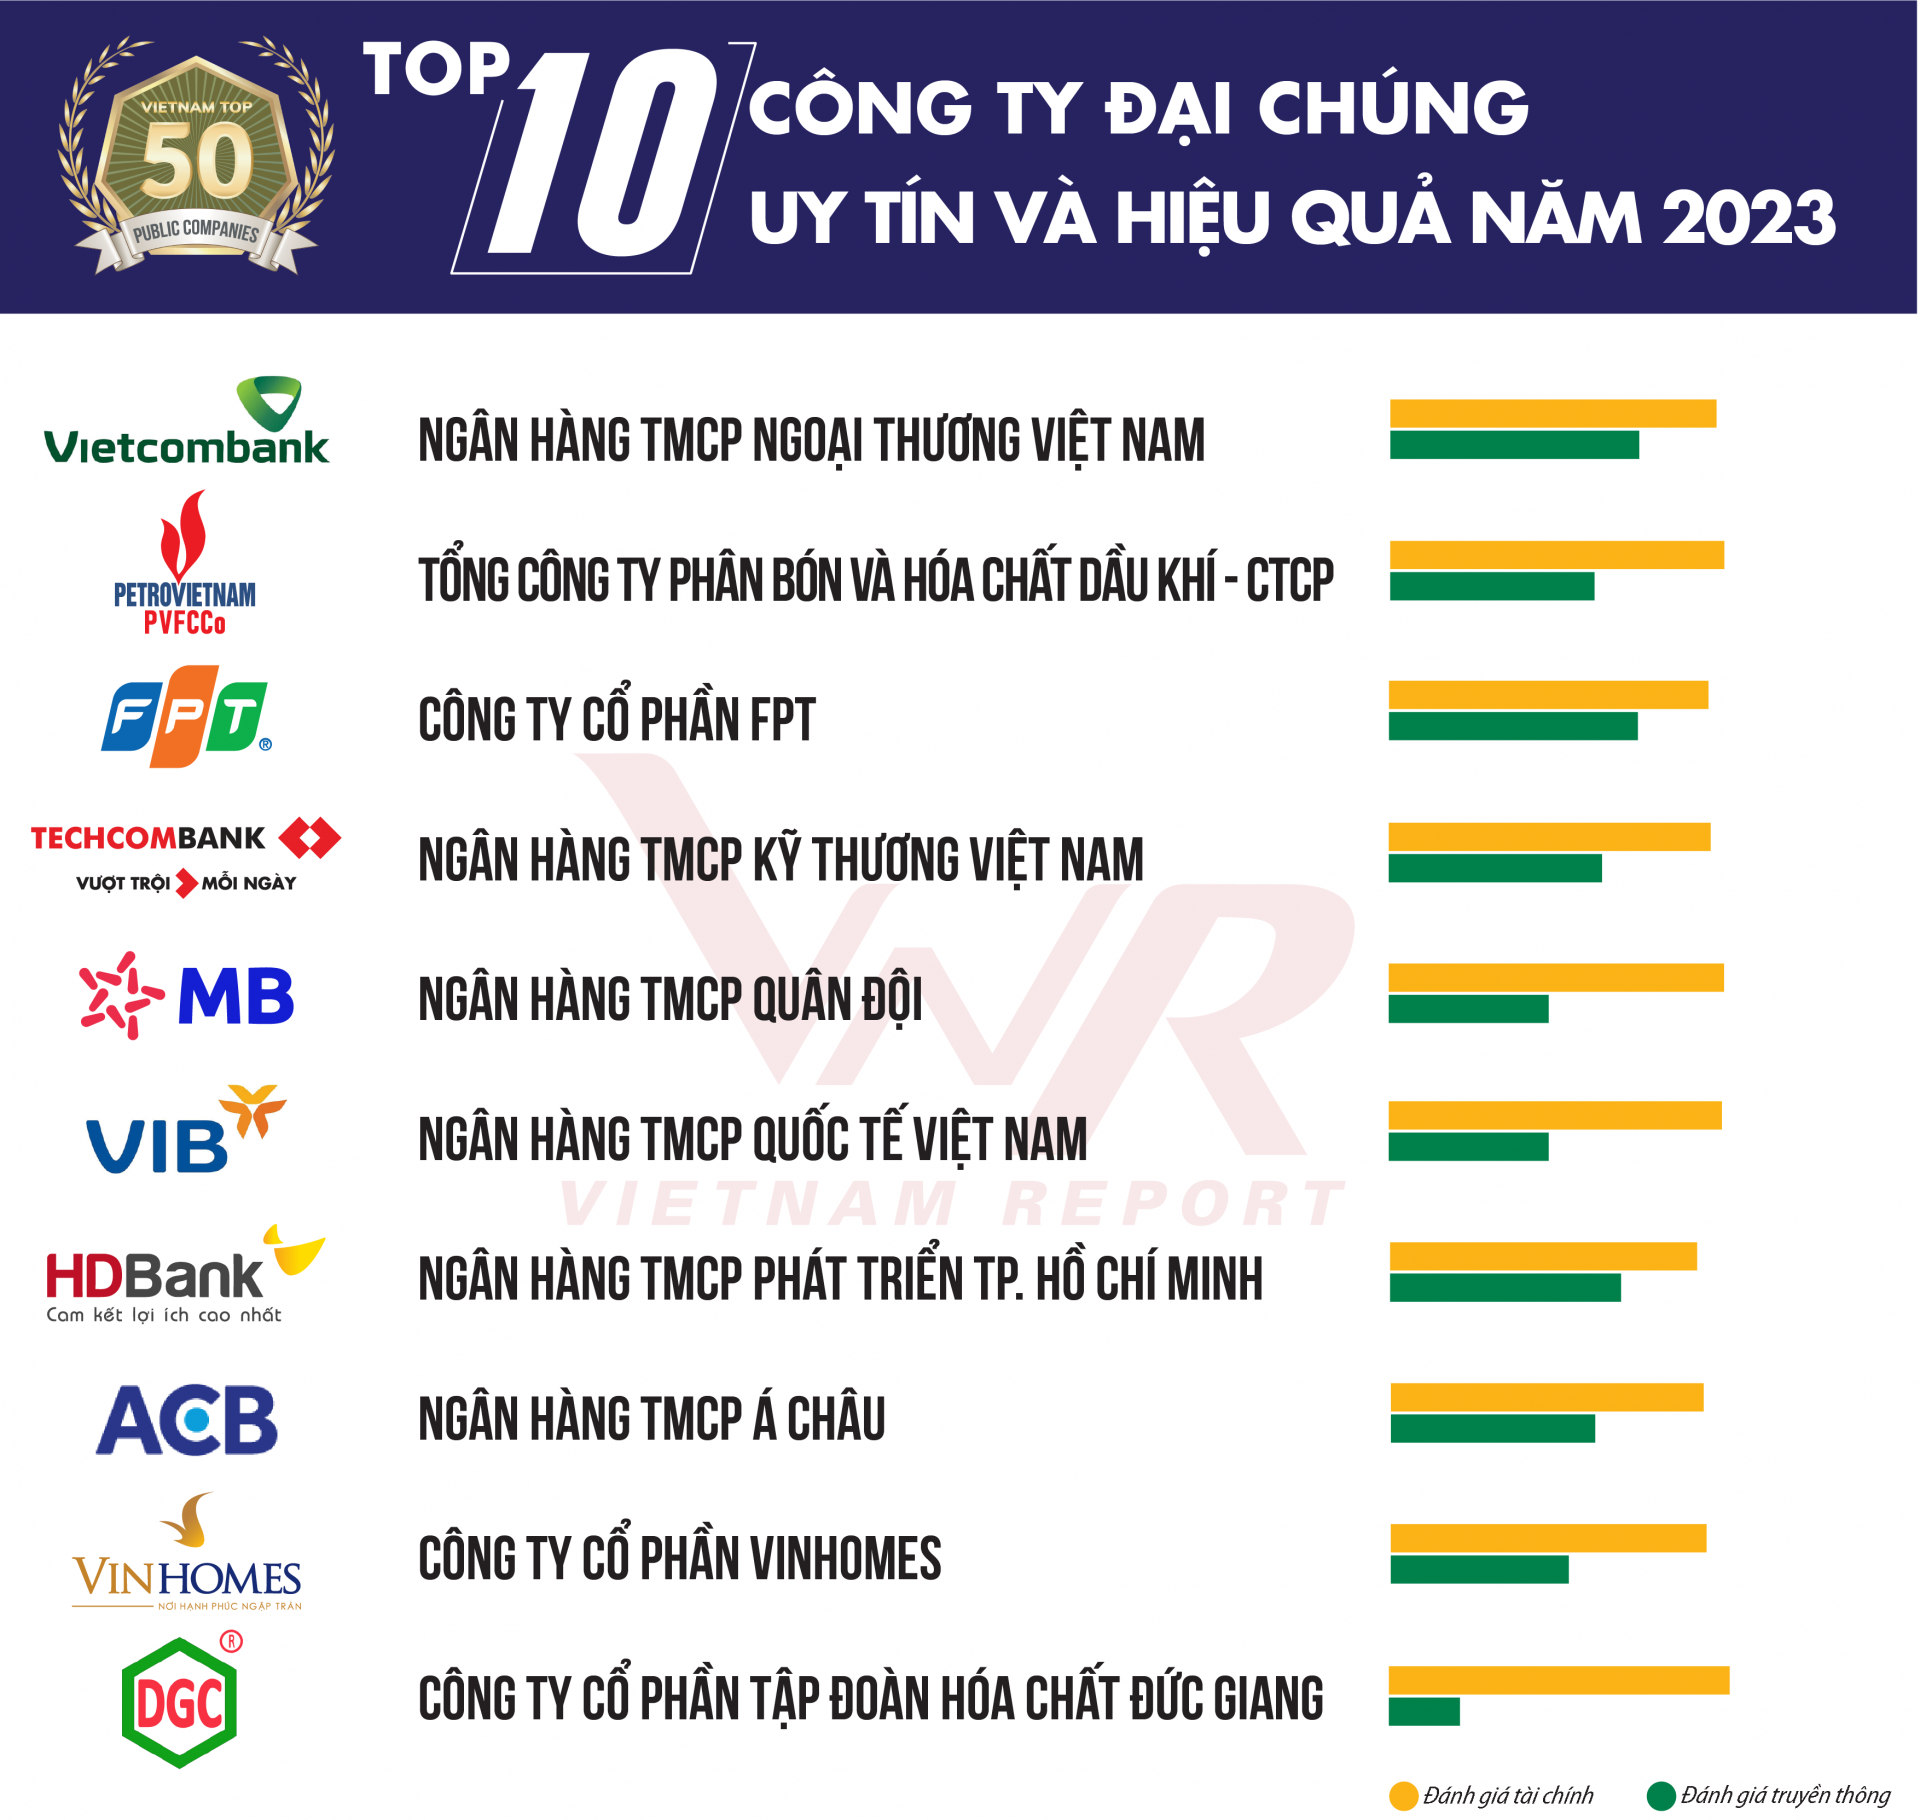 Vietnam’s 10 most reputable and efficient public companies in 2023